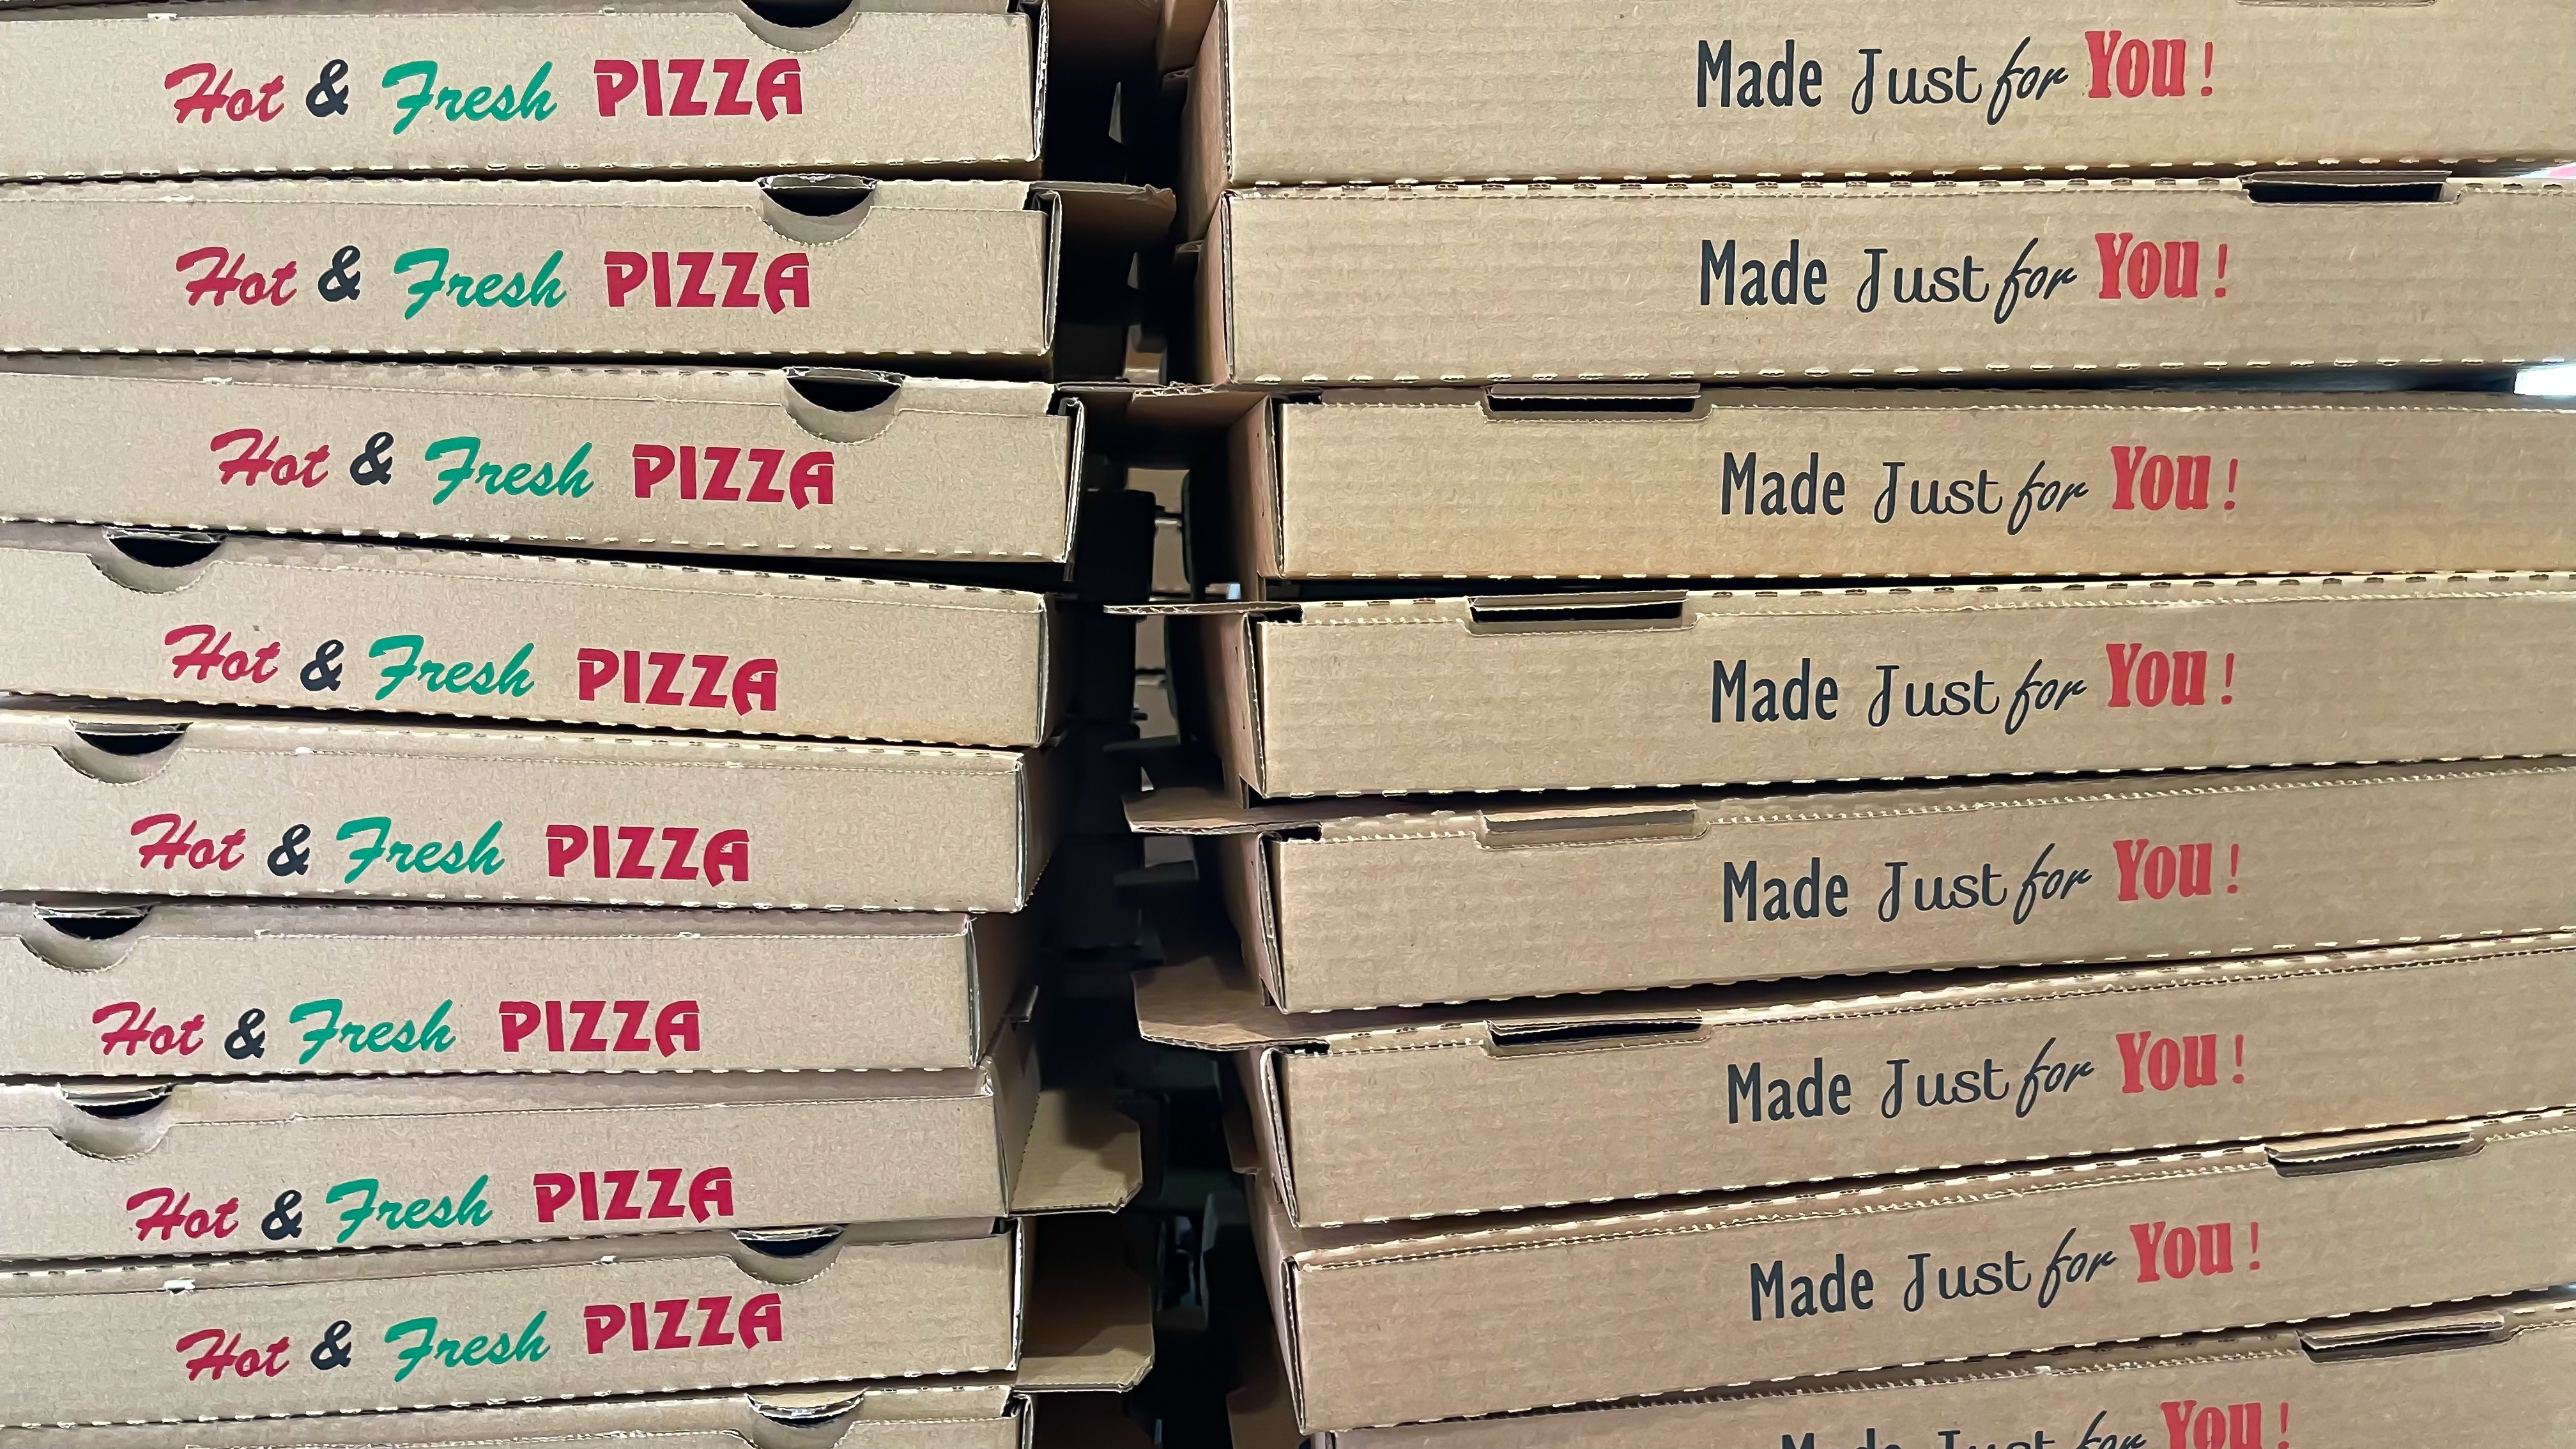 stacks of pizza boxes